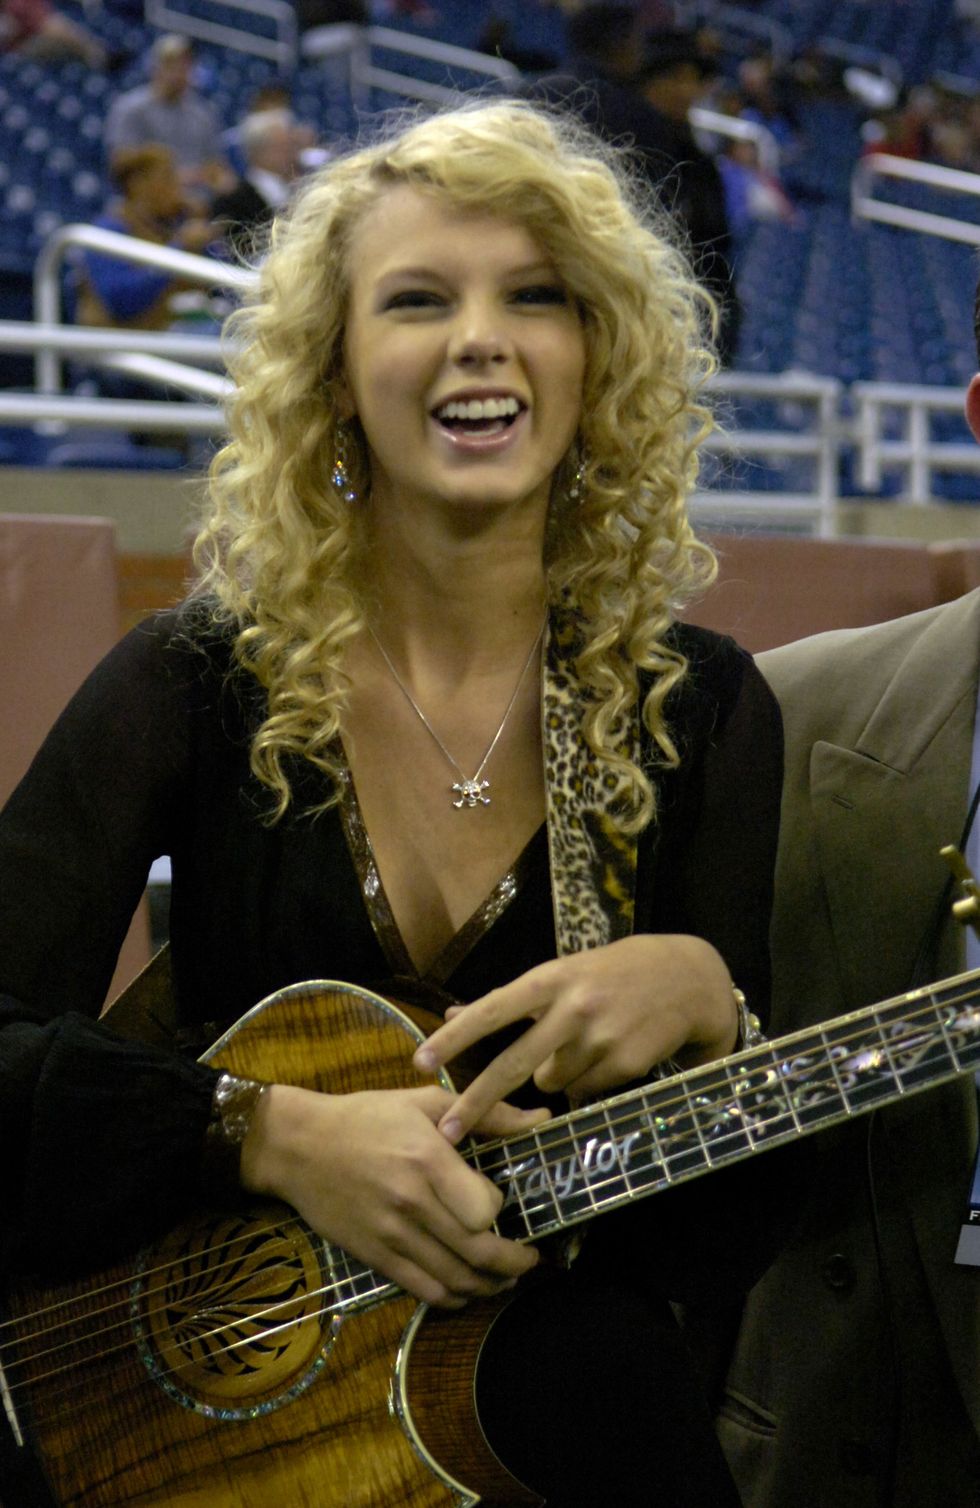 taylor swift performs at miami dolphins vs detroit lions november 23, 2006